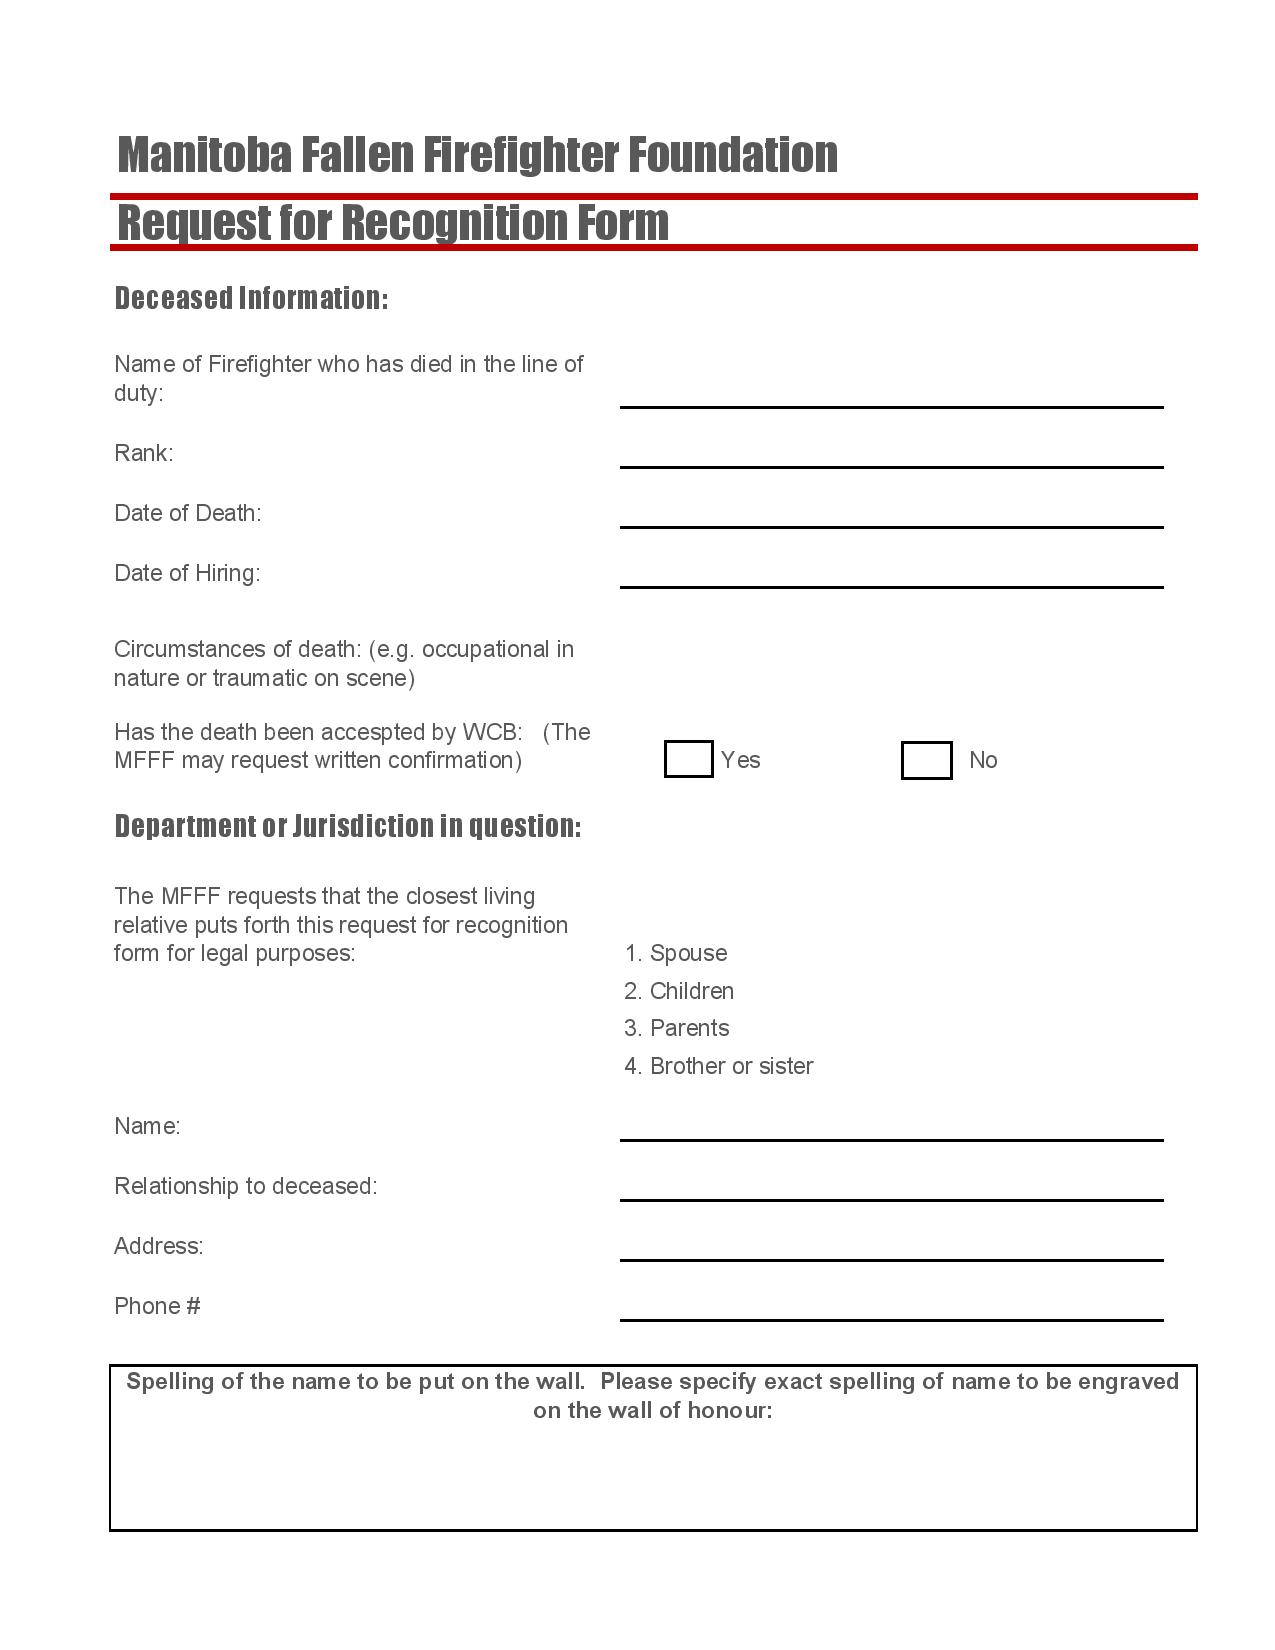 MFFF Request for Recognition Form-page-001